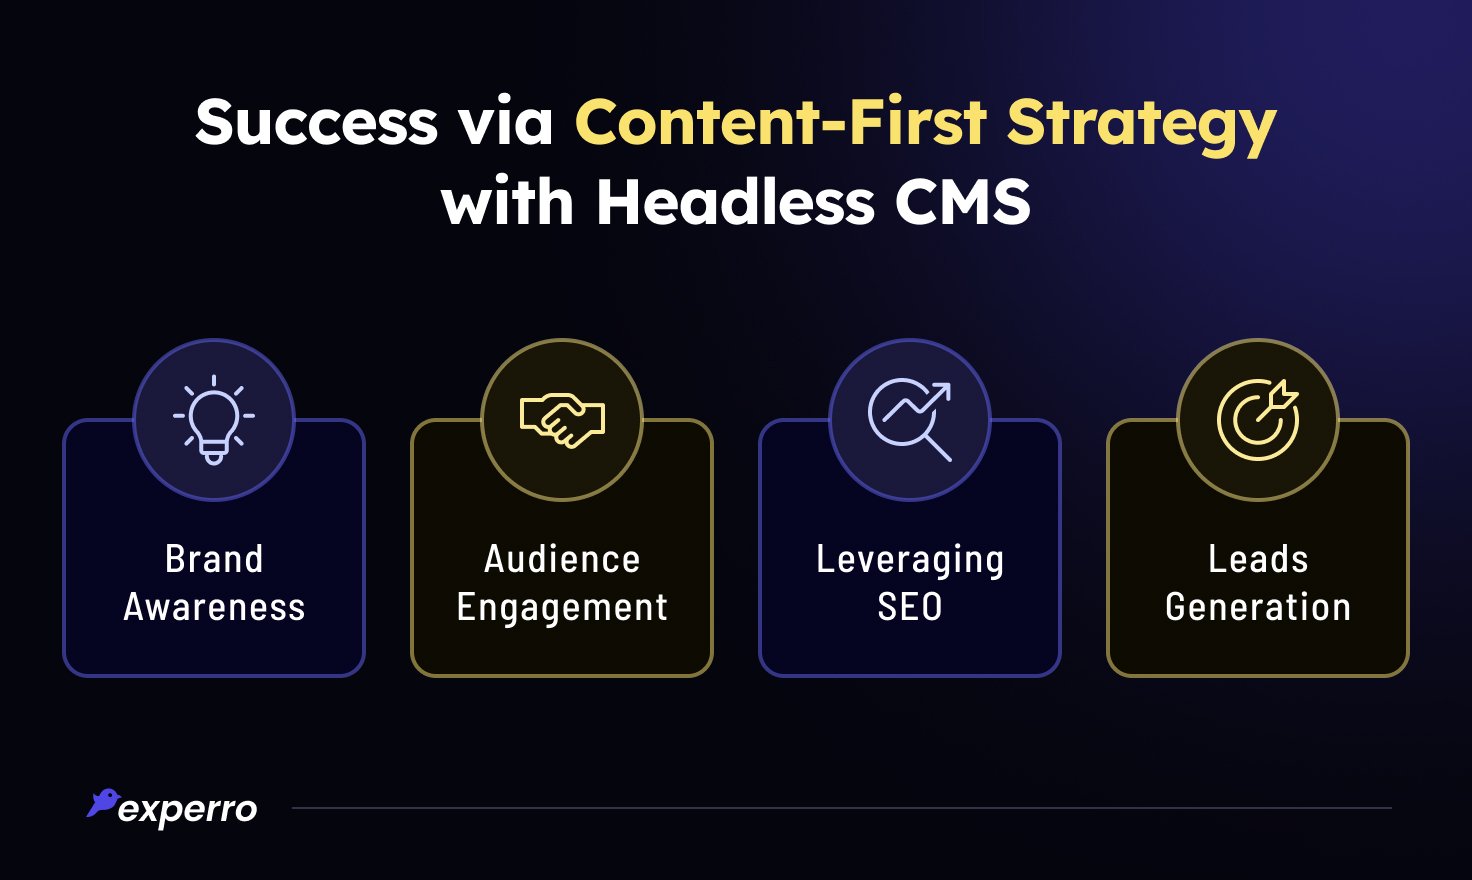 How Headless CMS helps in Successful Content-first Strategy